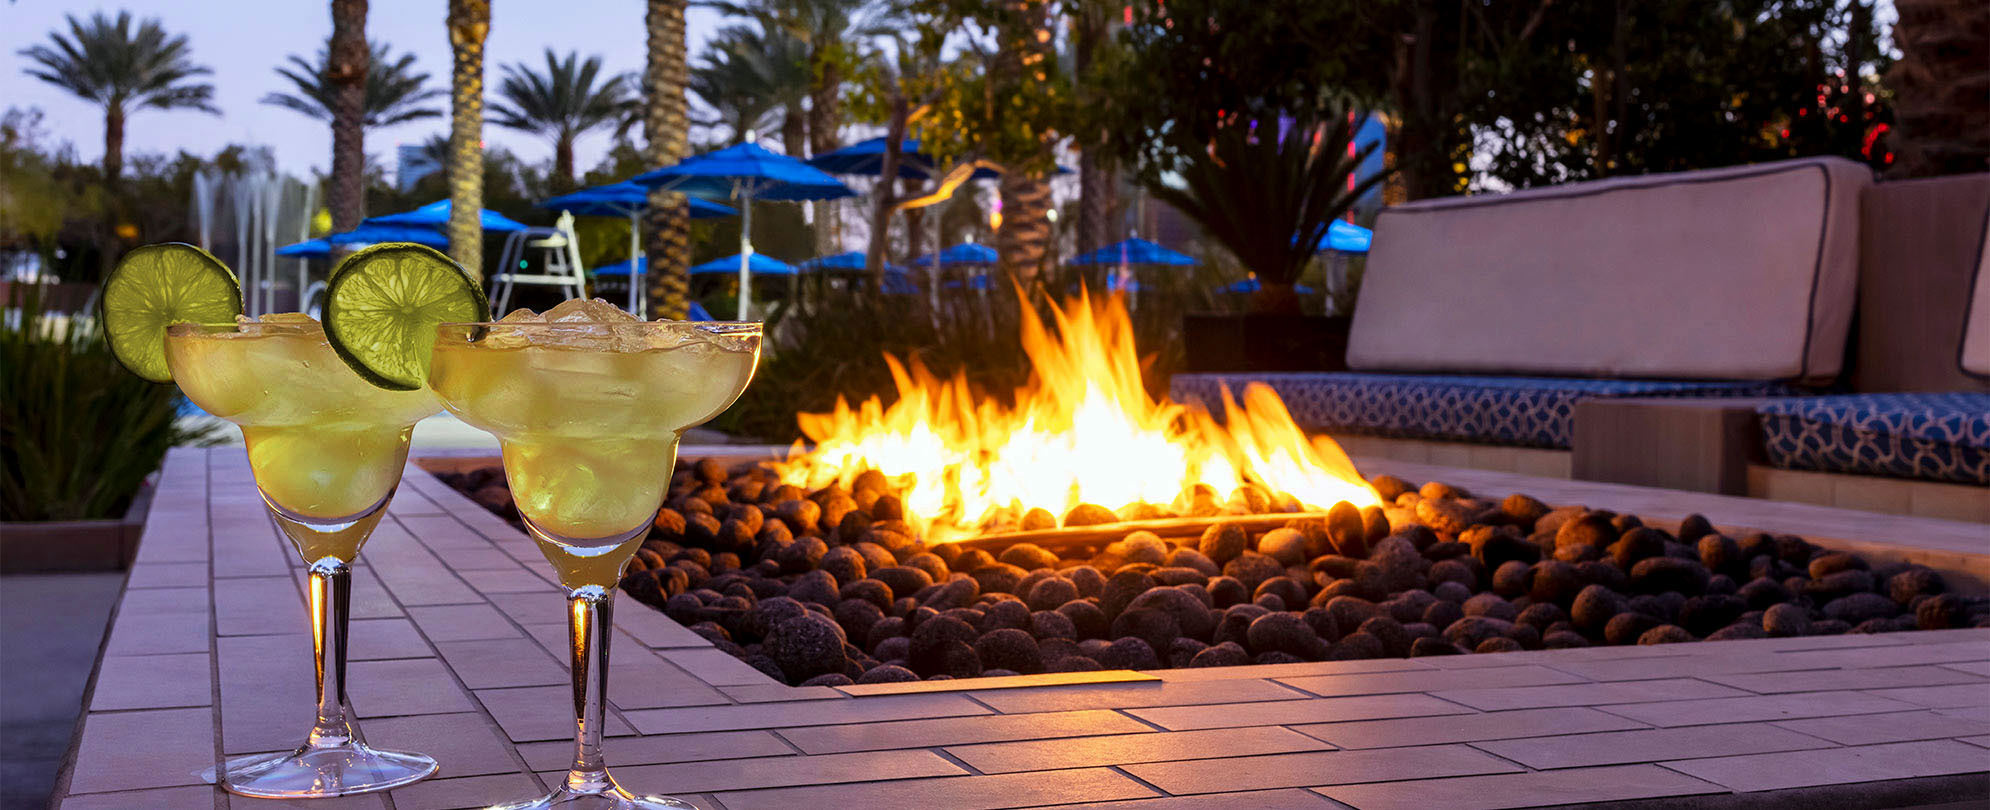 Cocktails around the fire pit and pool at Margaritaville Vacation Club by Wyndham - Desert Blue in Las Vegas, NV.